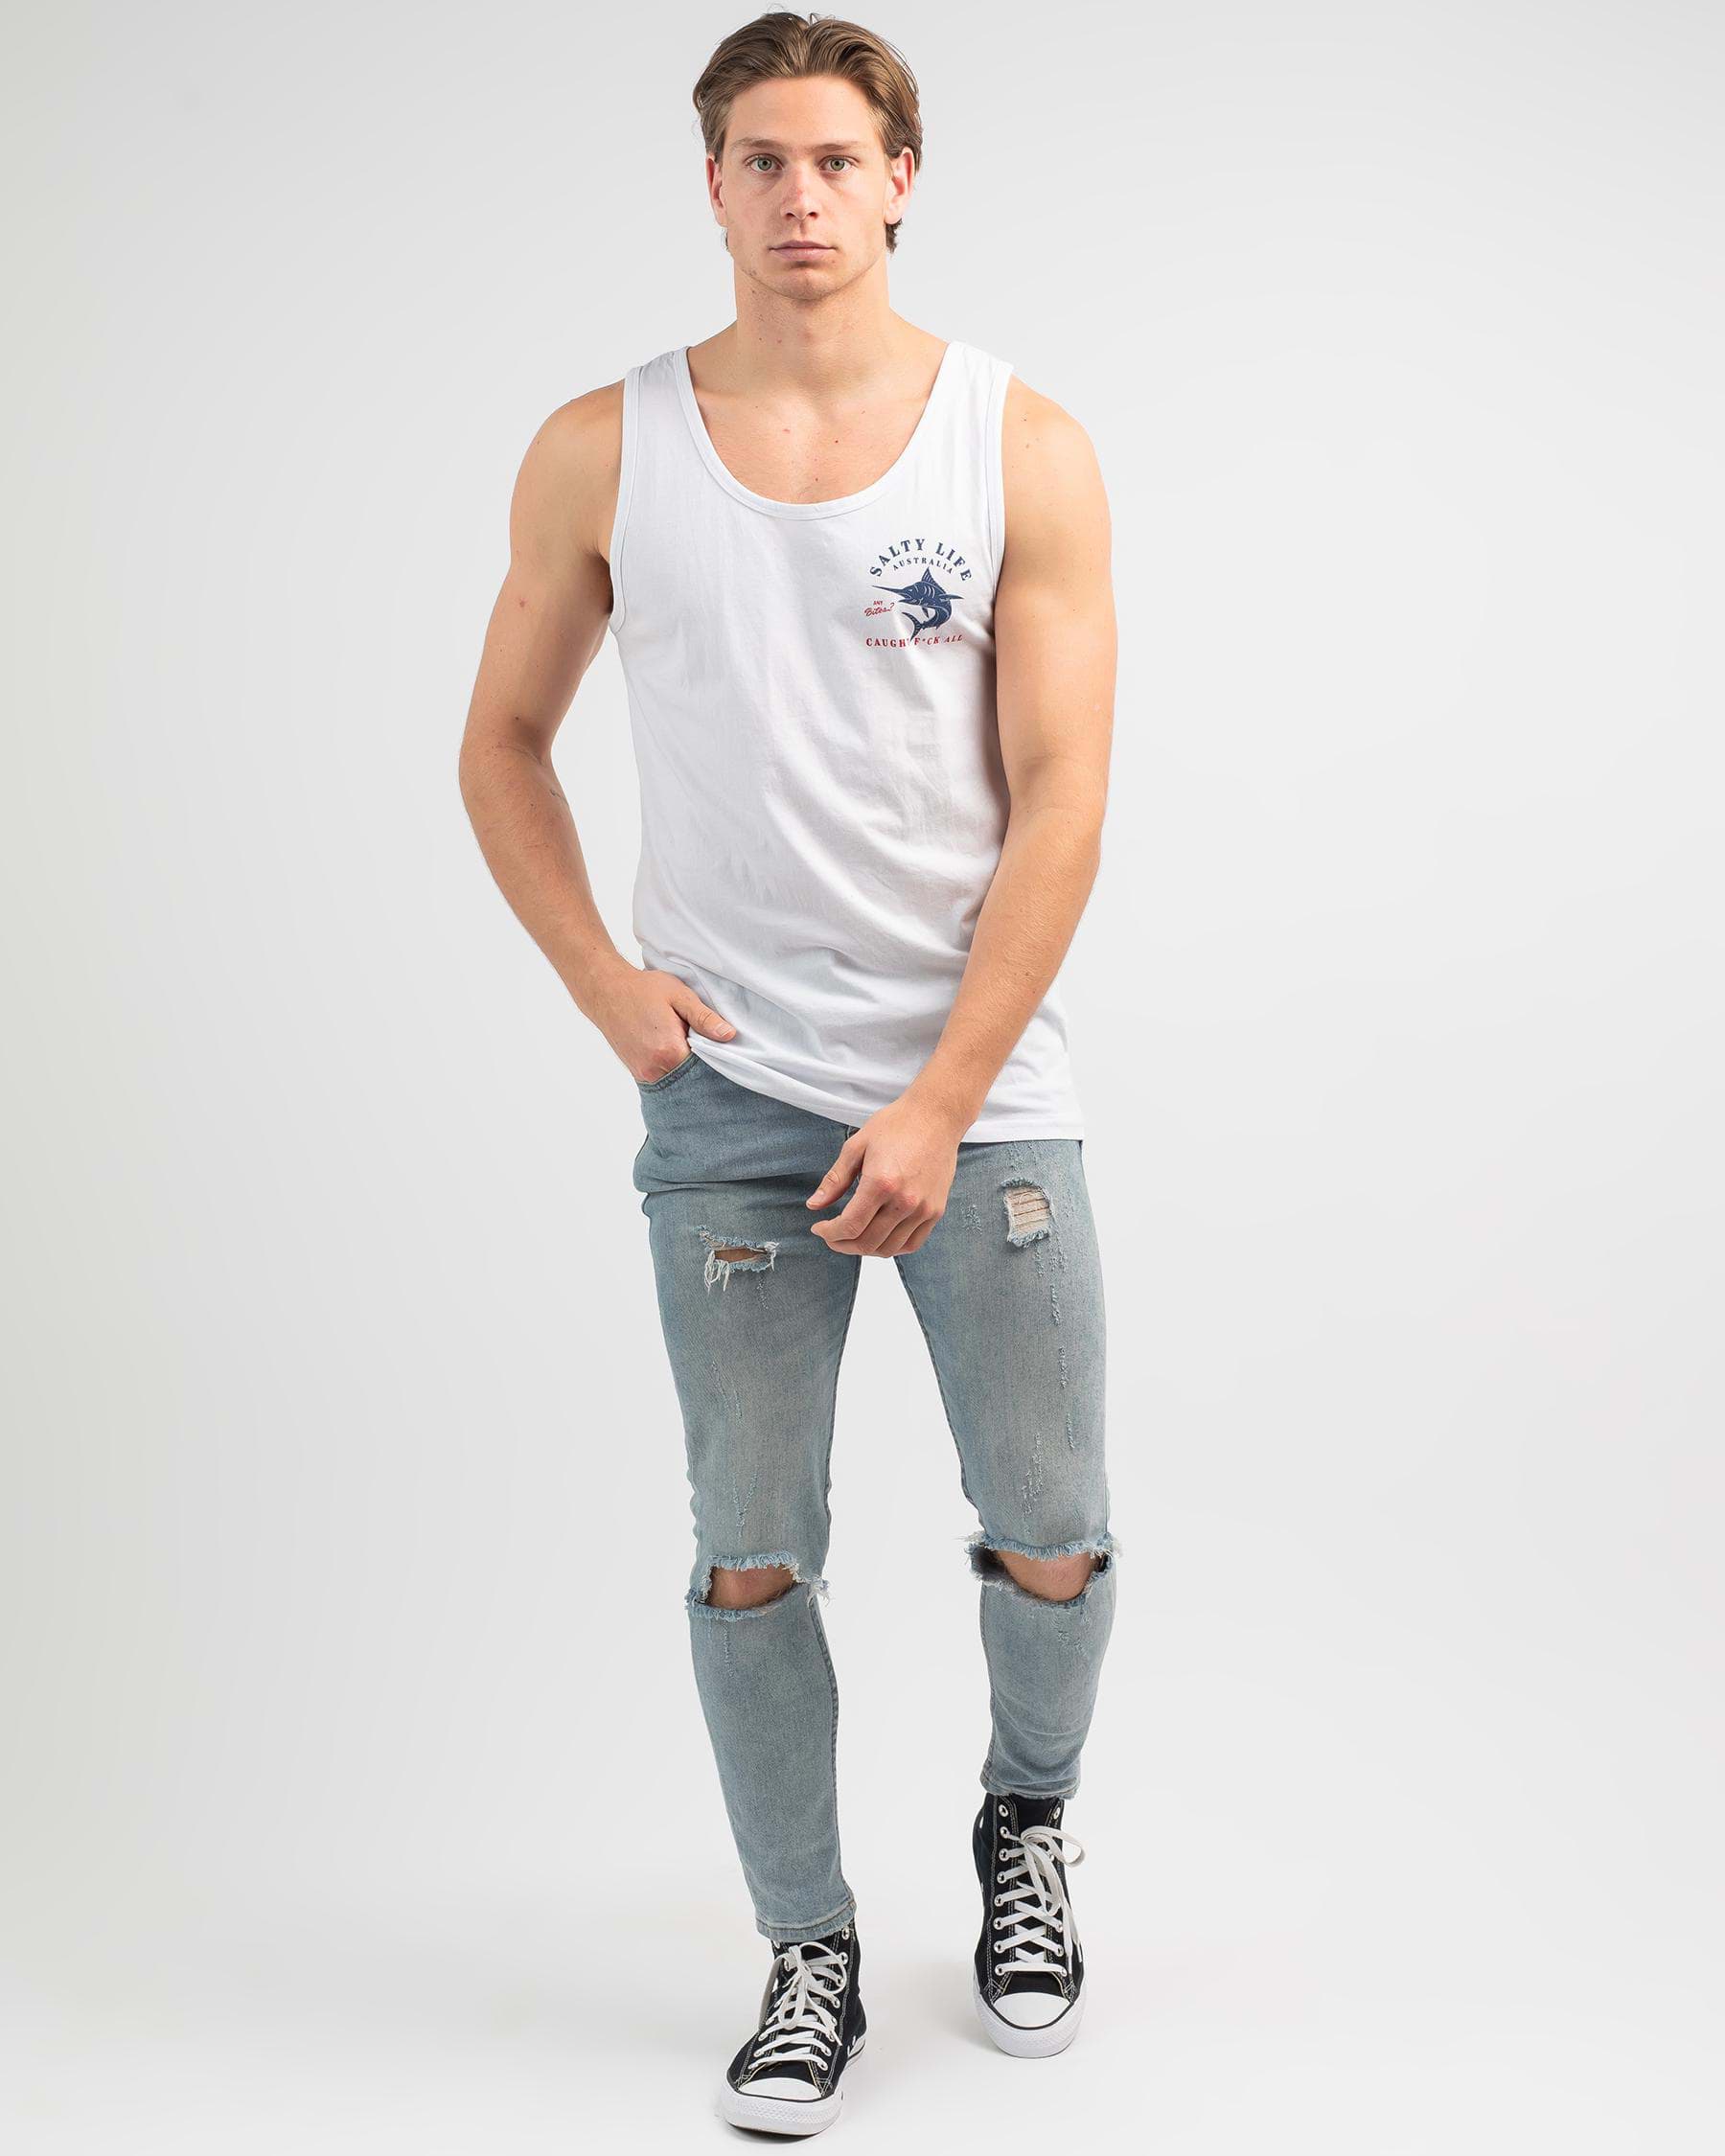 Shop Salty Life Any Bites Singlet In White - Fast Shipping & Easy ...